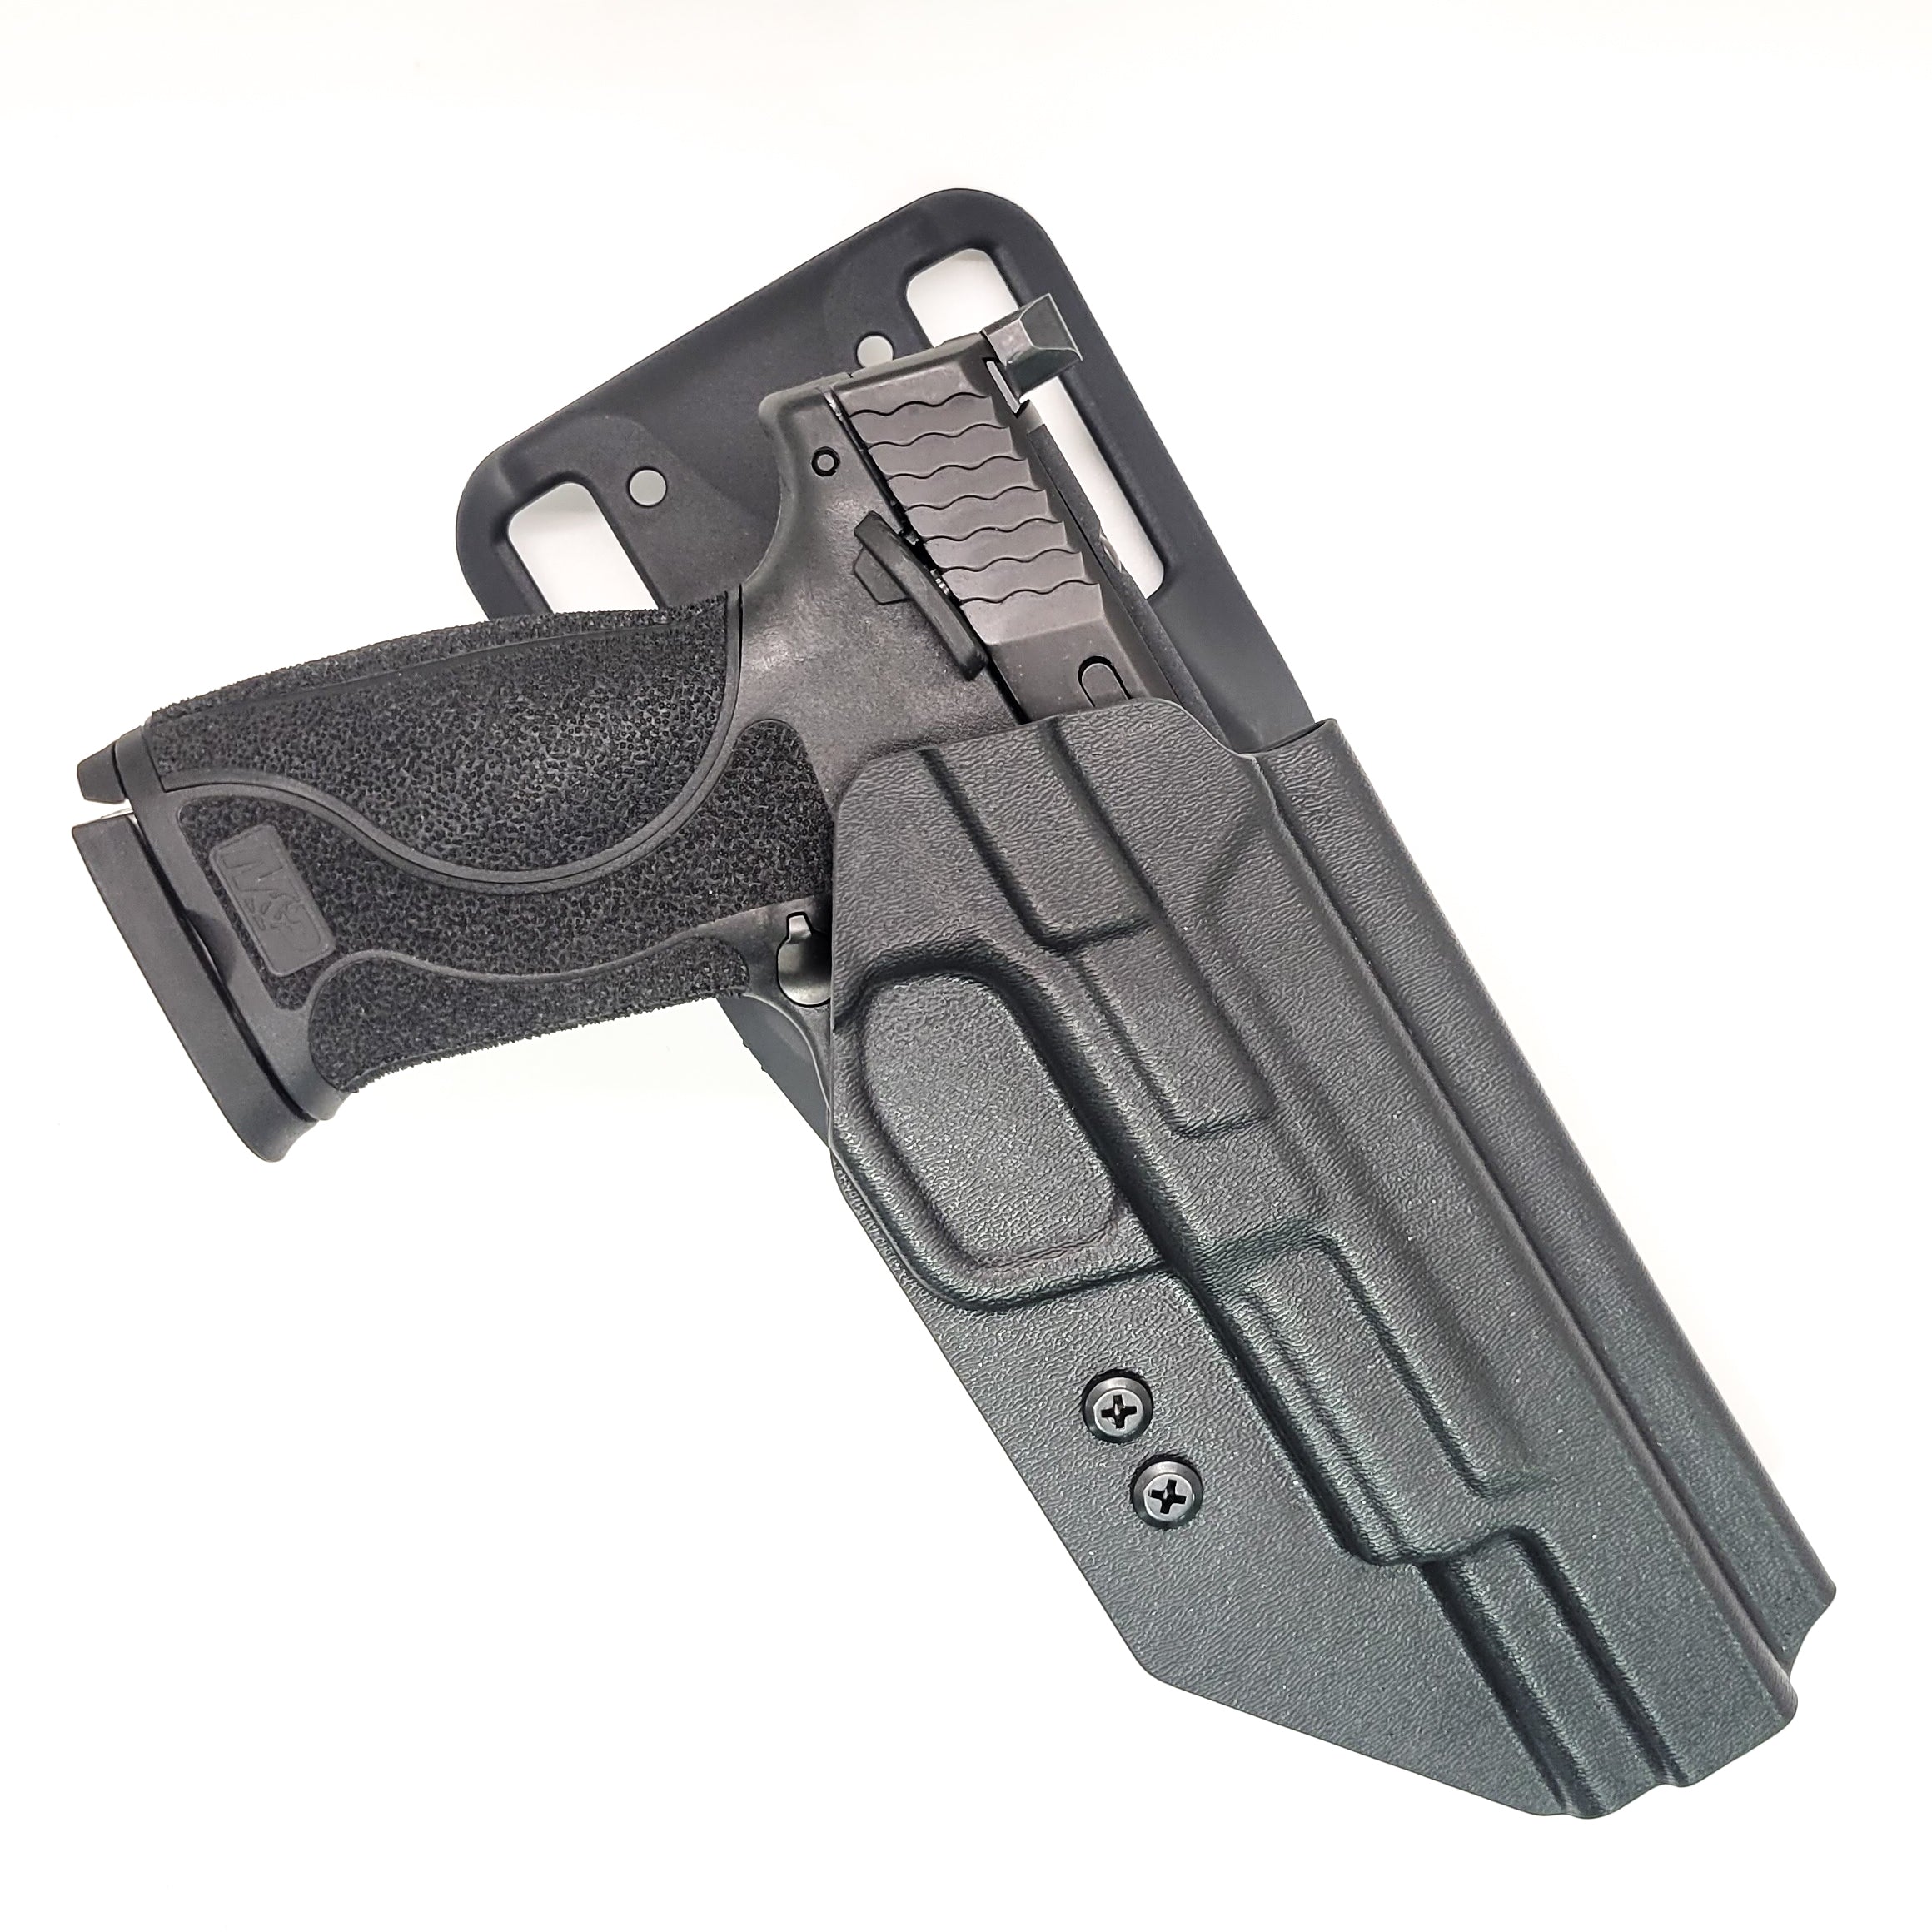 For the best OWB Outside Waistband Kydex Duty and Competition Holster designed to fit the Smith and Wesson M&P 10MM M2.0 4", 4.6", and Performance Center 5.6" pistols with or without the thumb safety Shop Four Brothers Holsters. Full sweat guard, adjustable retention, cleared for a red dot sight. Made in USA